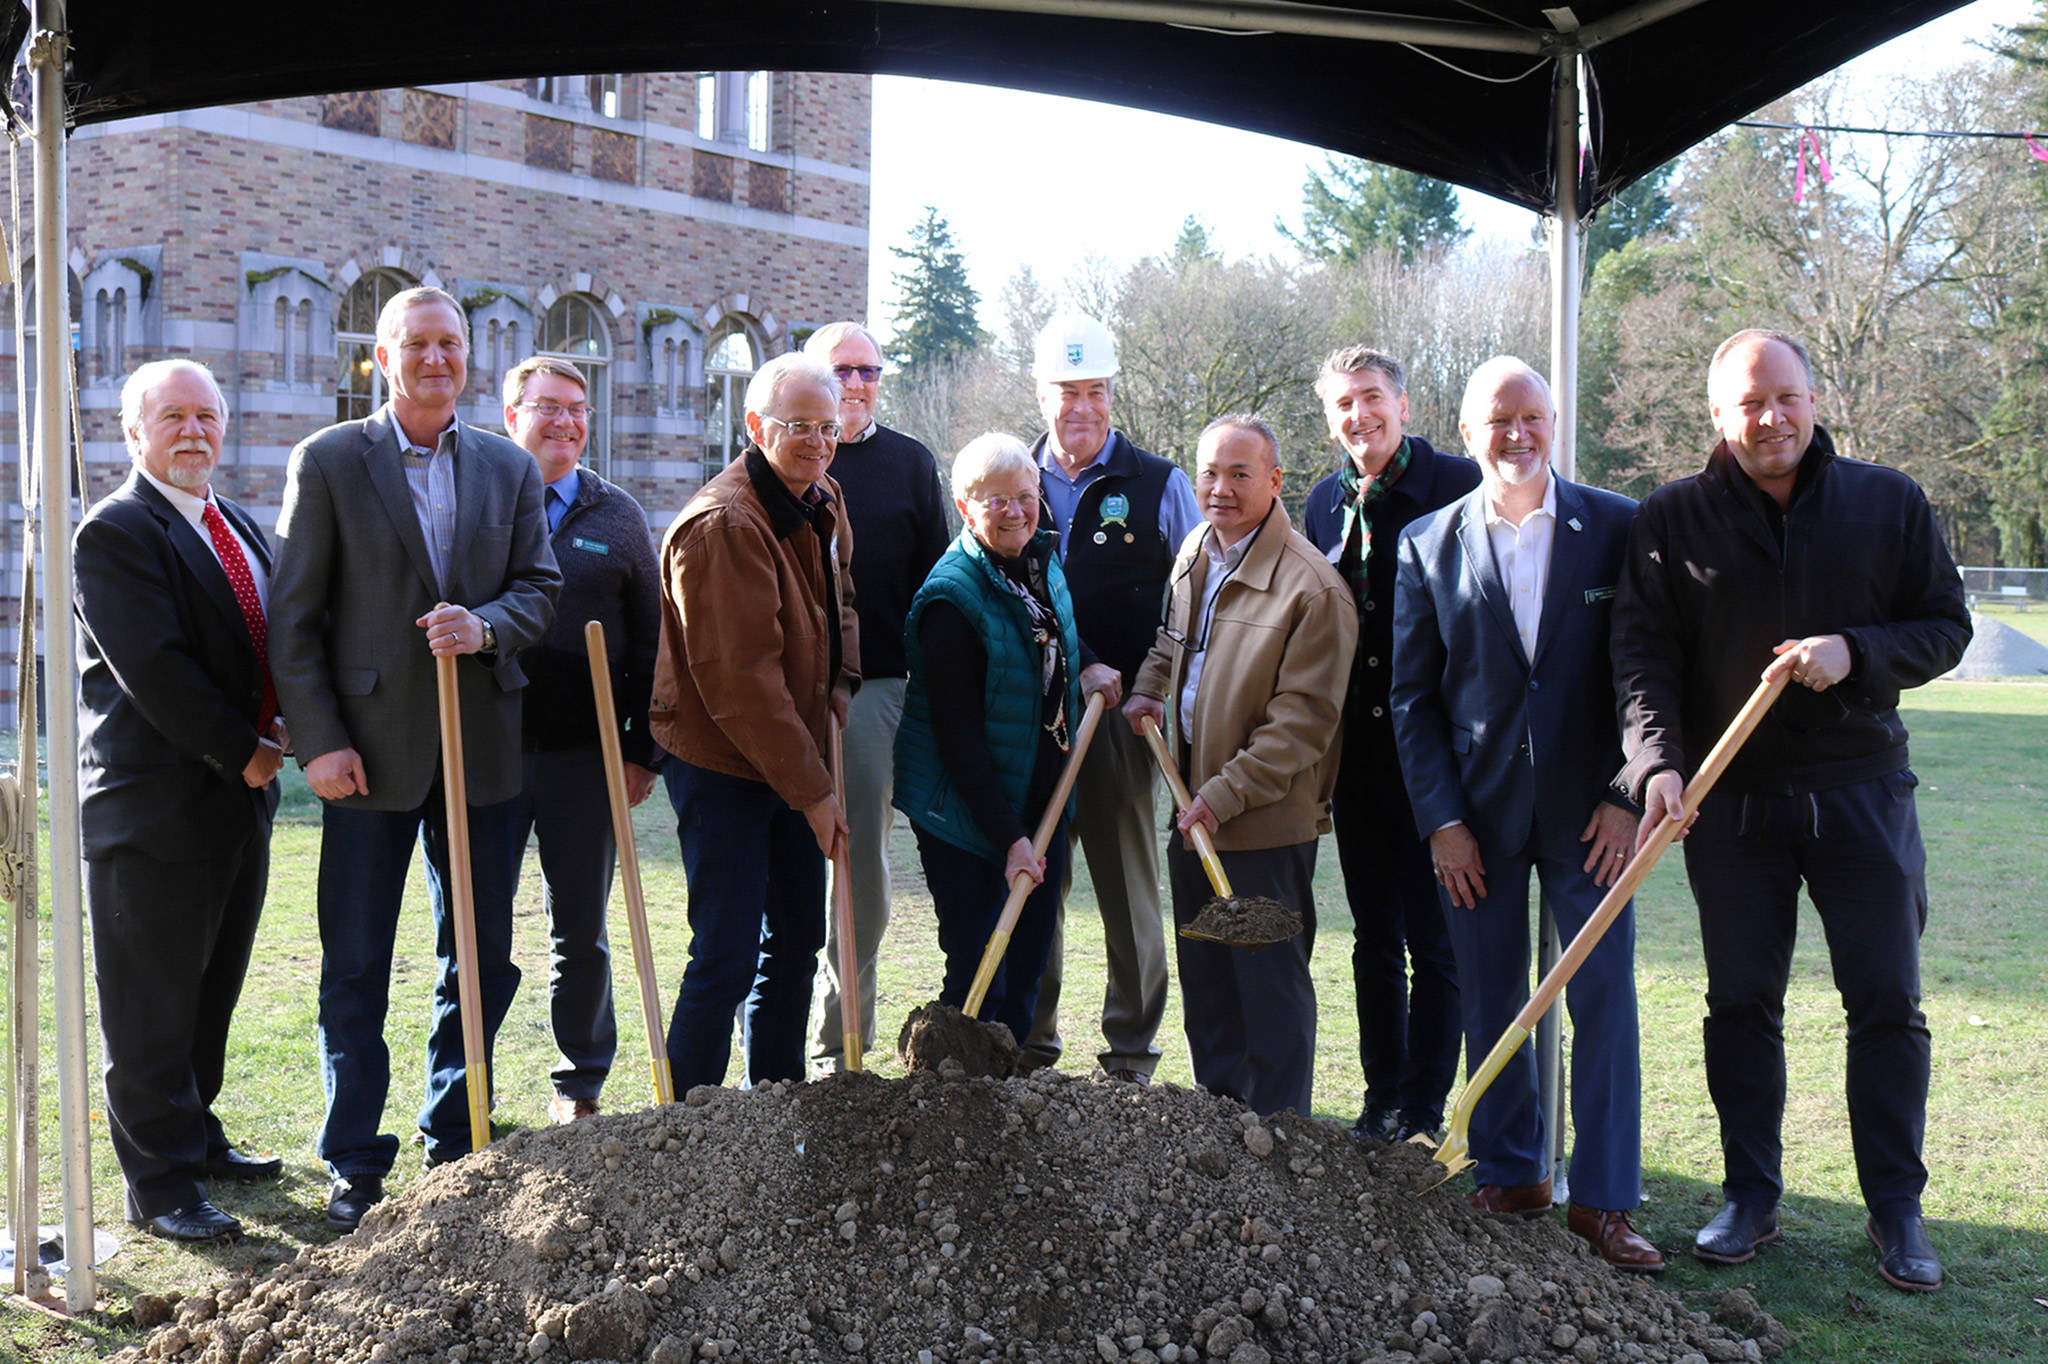 State legislators Jeff Holy and David Frockt pose with Kevin Daniels and Washington State Parks commissioners and staff at the ceremonial groundbreaking for the Lodge at Saint Edward Park on Dec. 7. Katie Metzger/staff photo